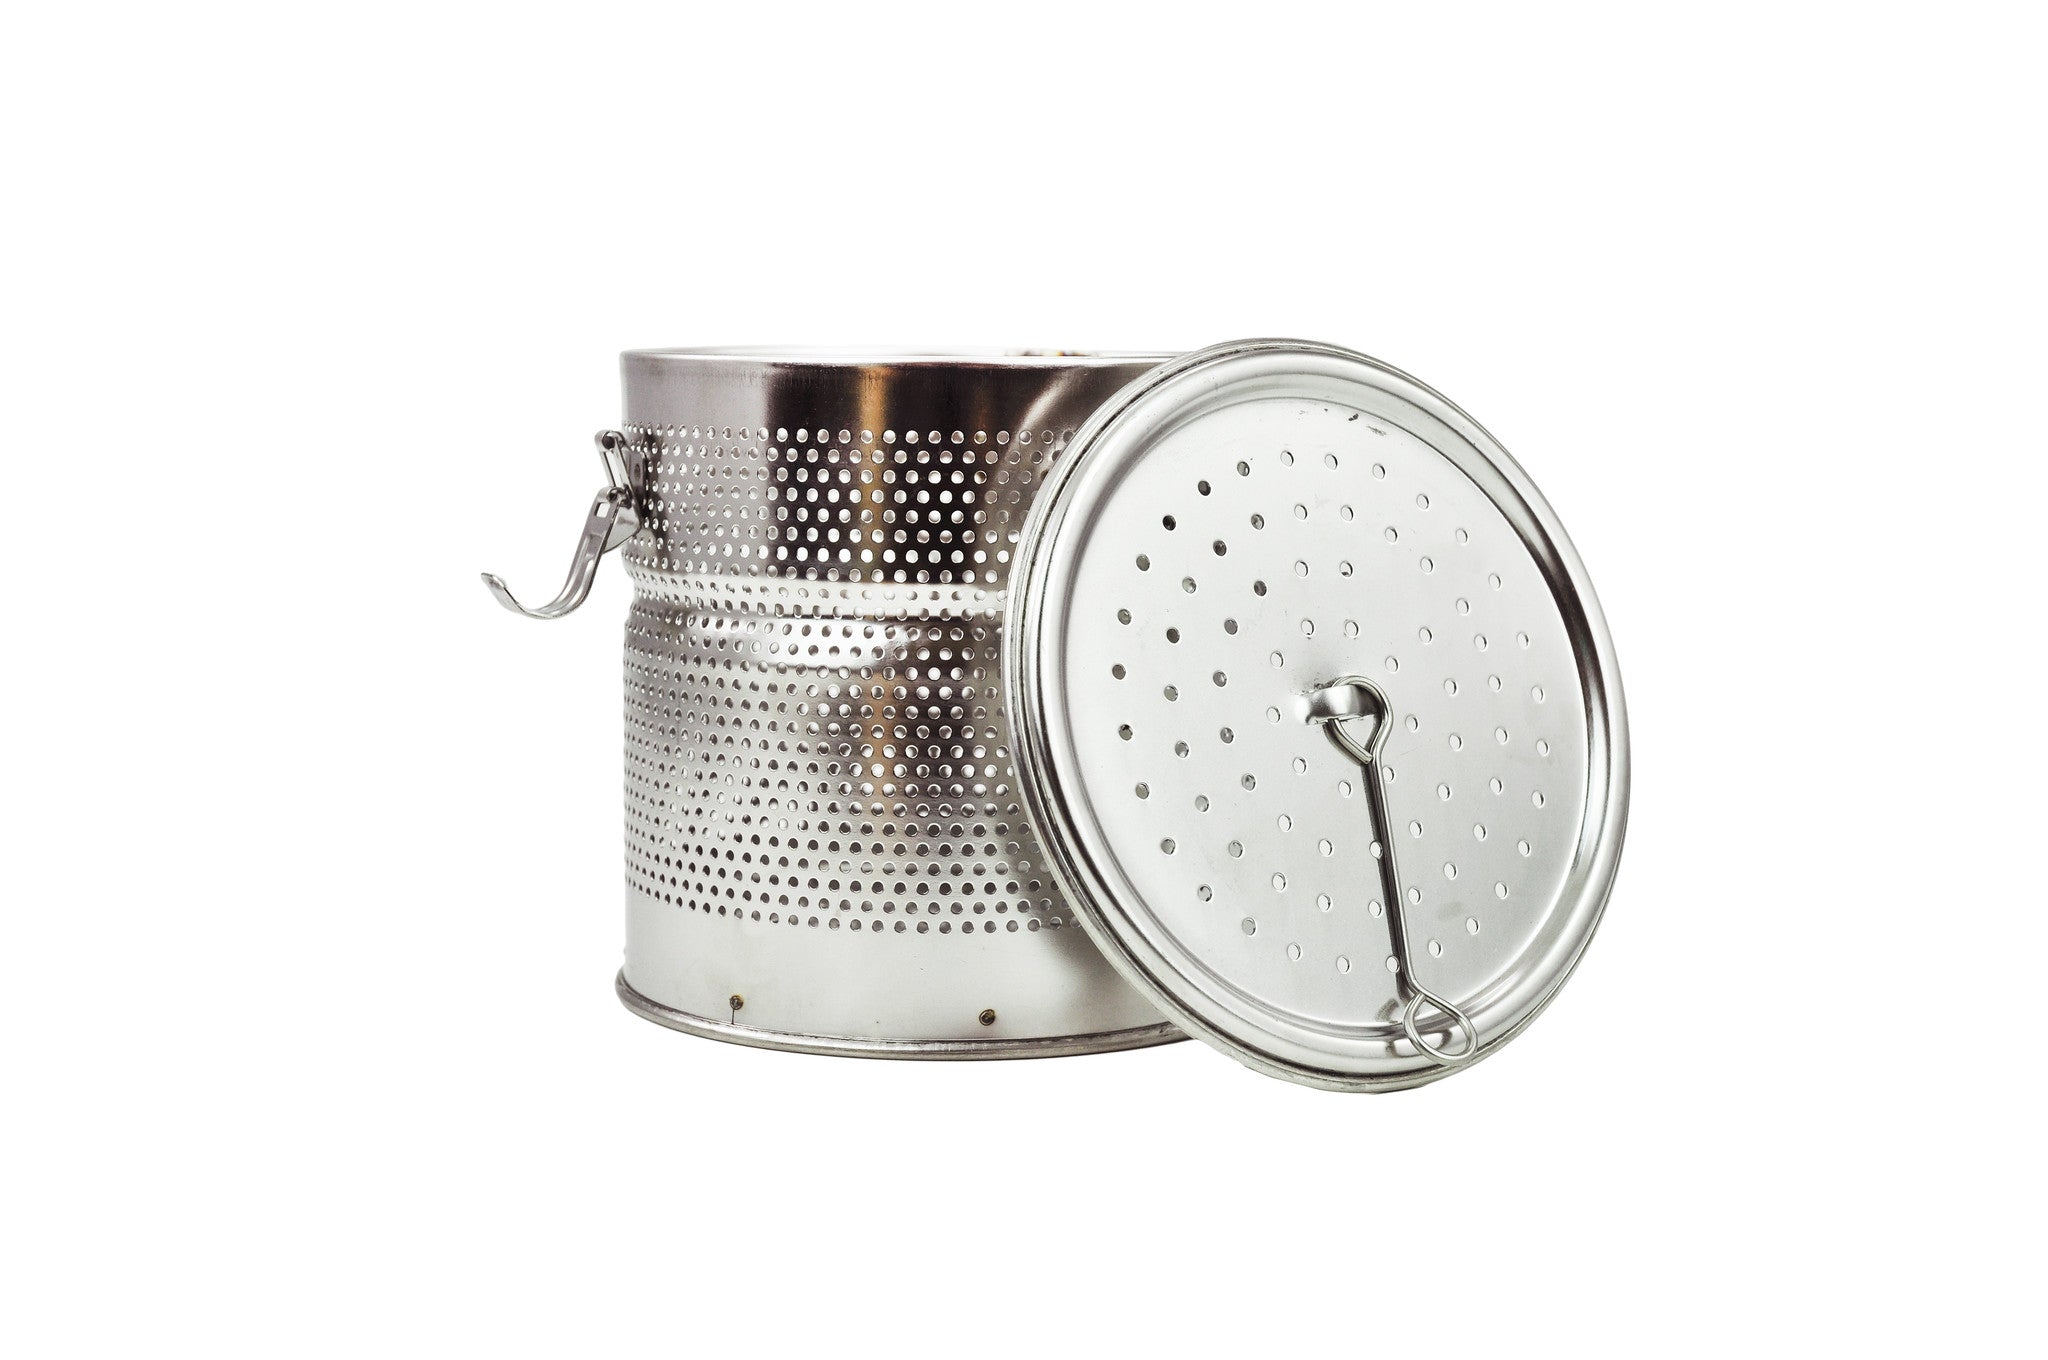 Soup and Stock Strainer – TOIRO